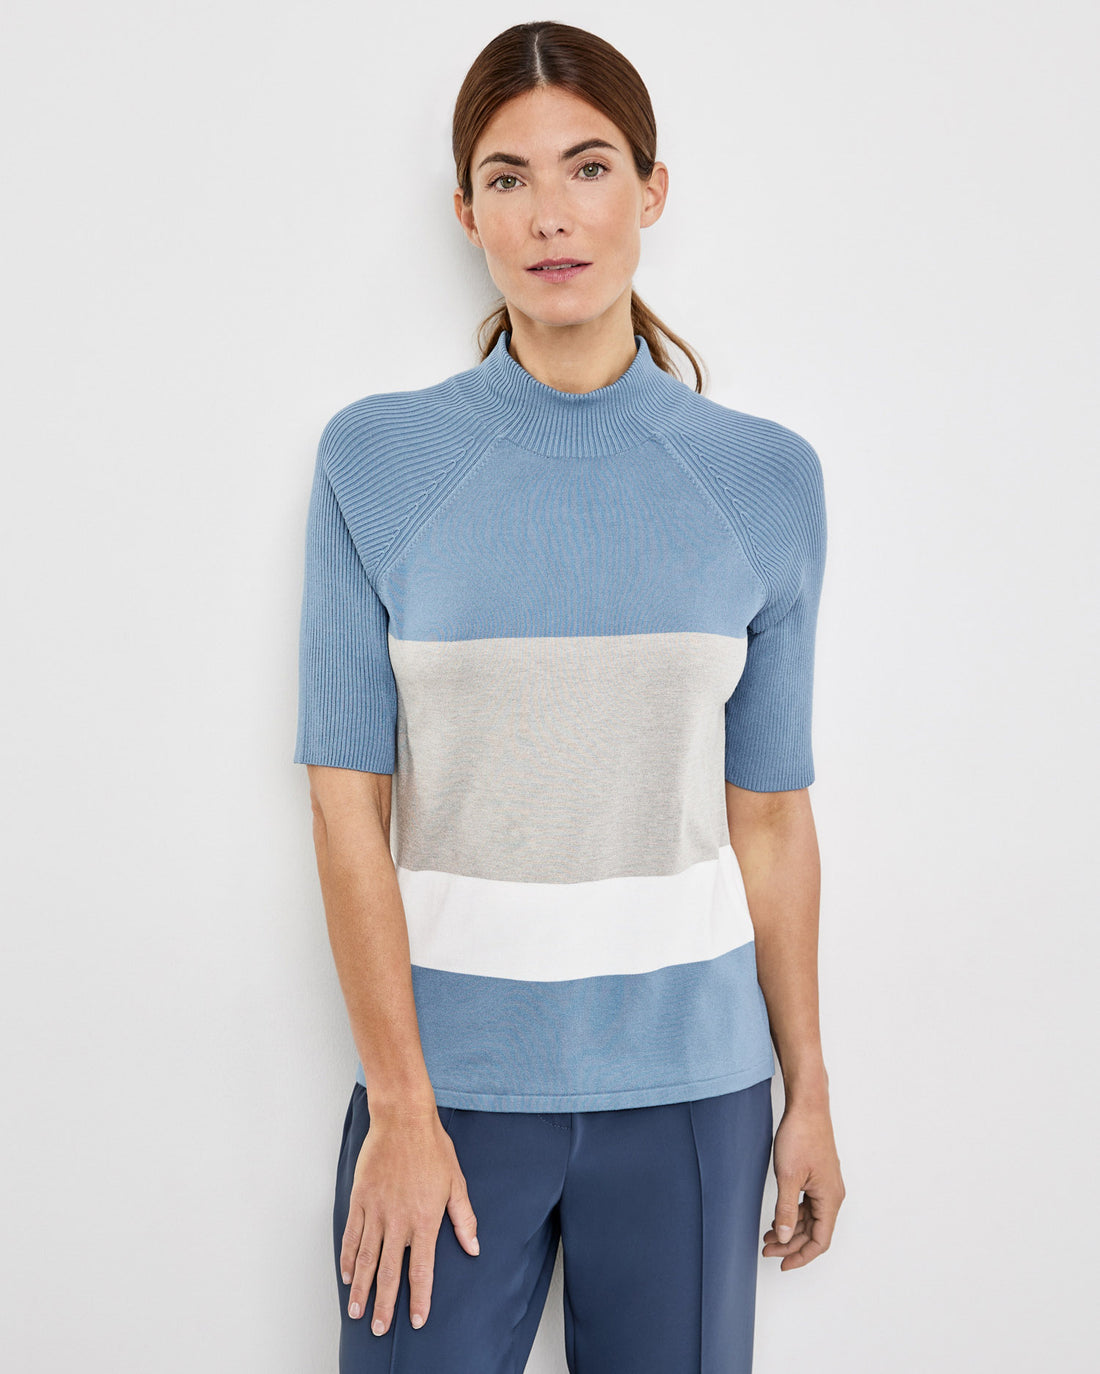 Light Blue Jumper With Block Stripes And 1/2-Length Sleeves